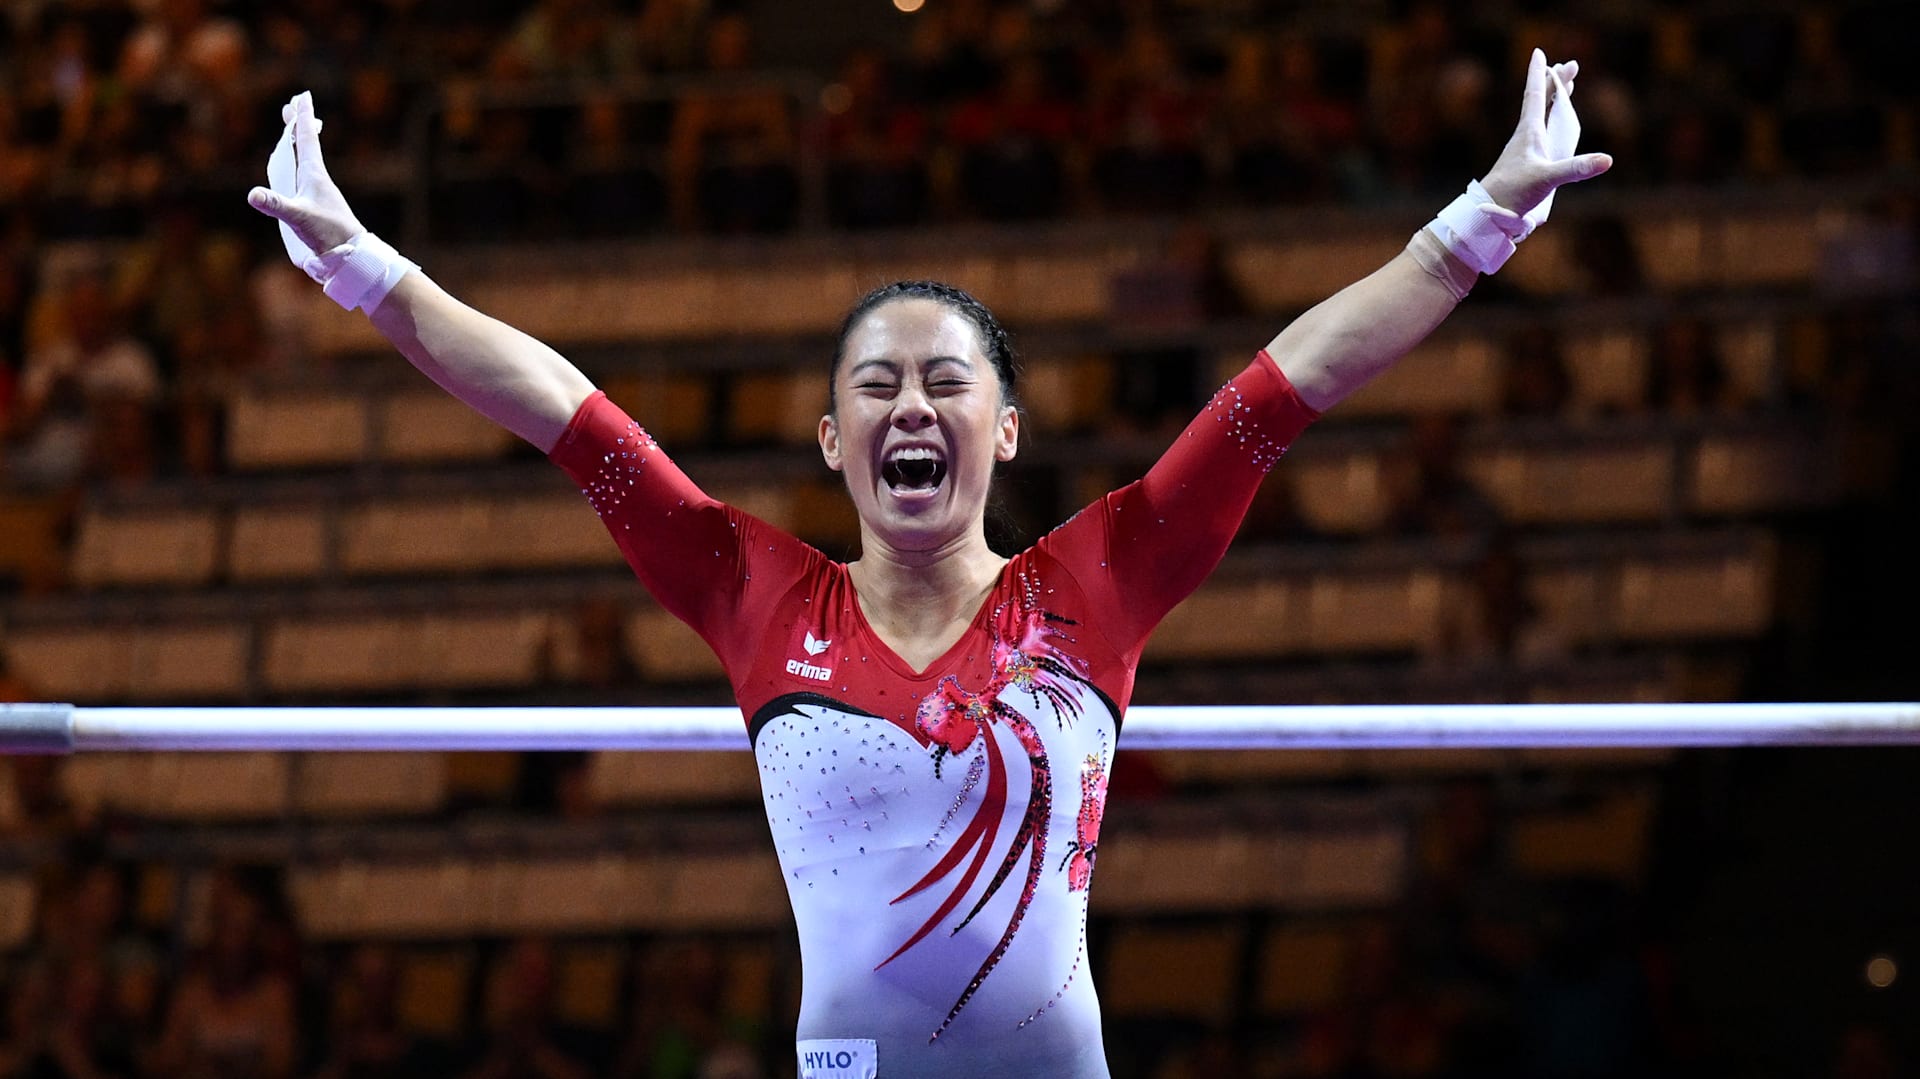 Former gymnast Kim Bui on her battle with bulimia: I want to say that  you are not alone